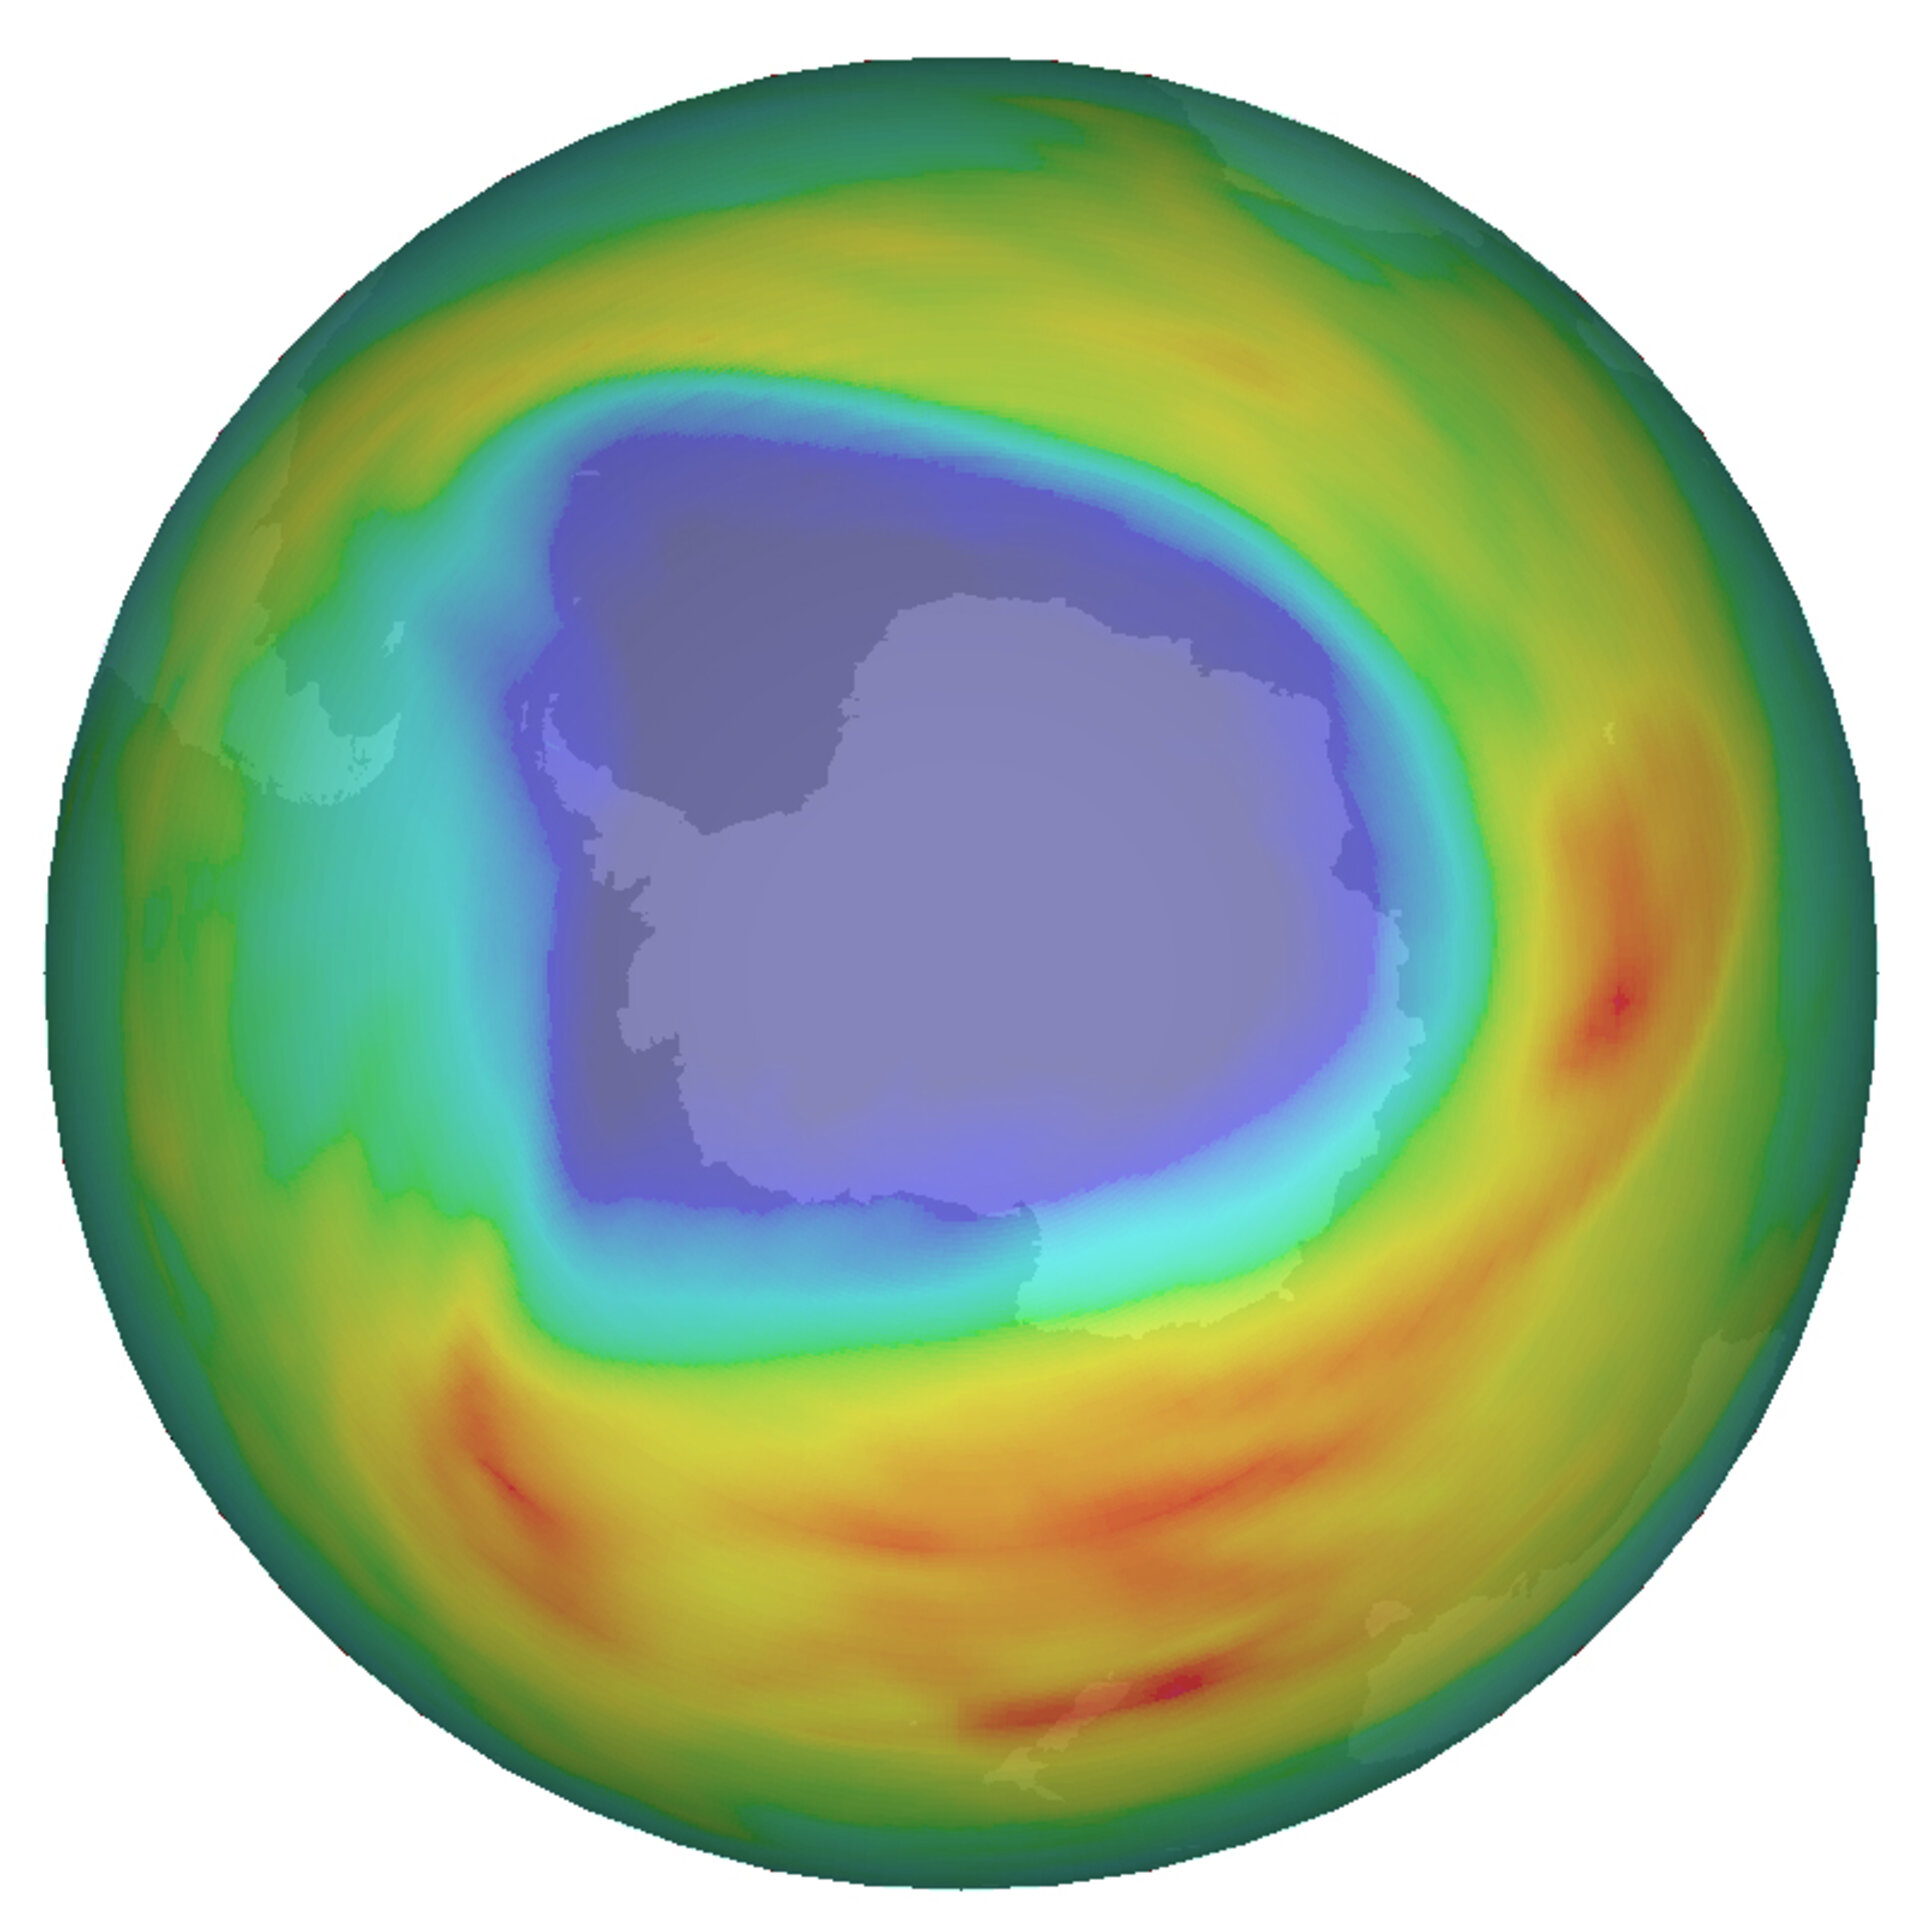 Ozone hole during 7 October 2008 as measured by Envisat